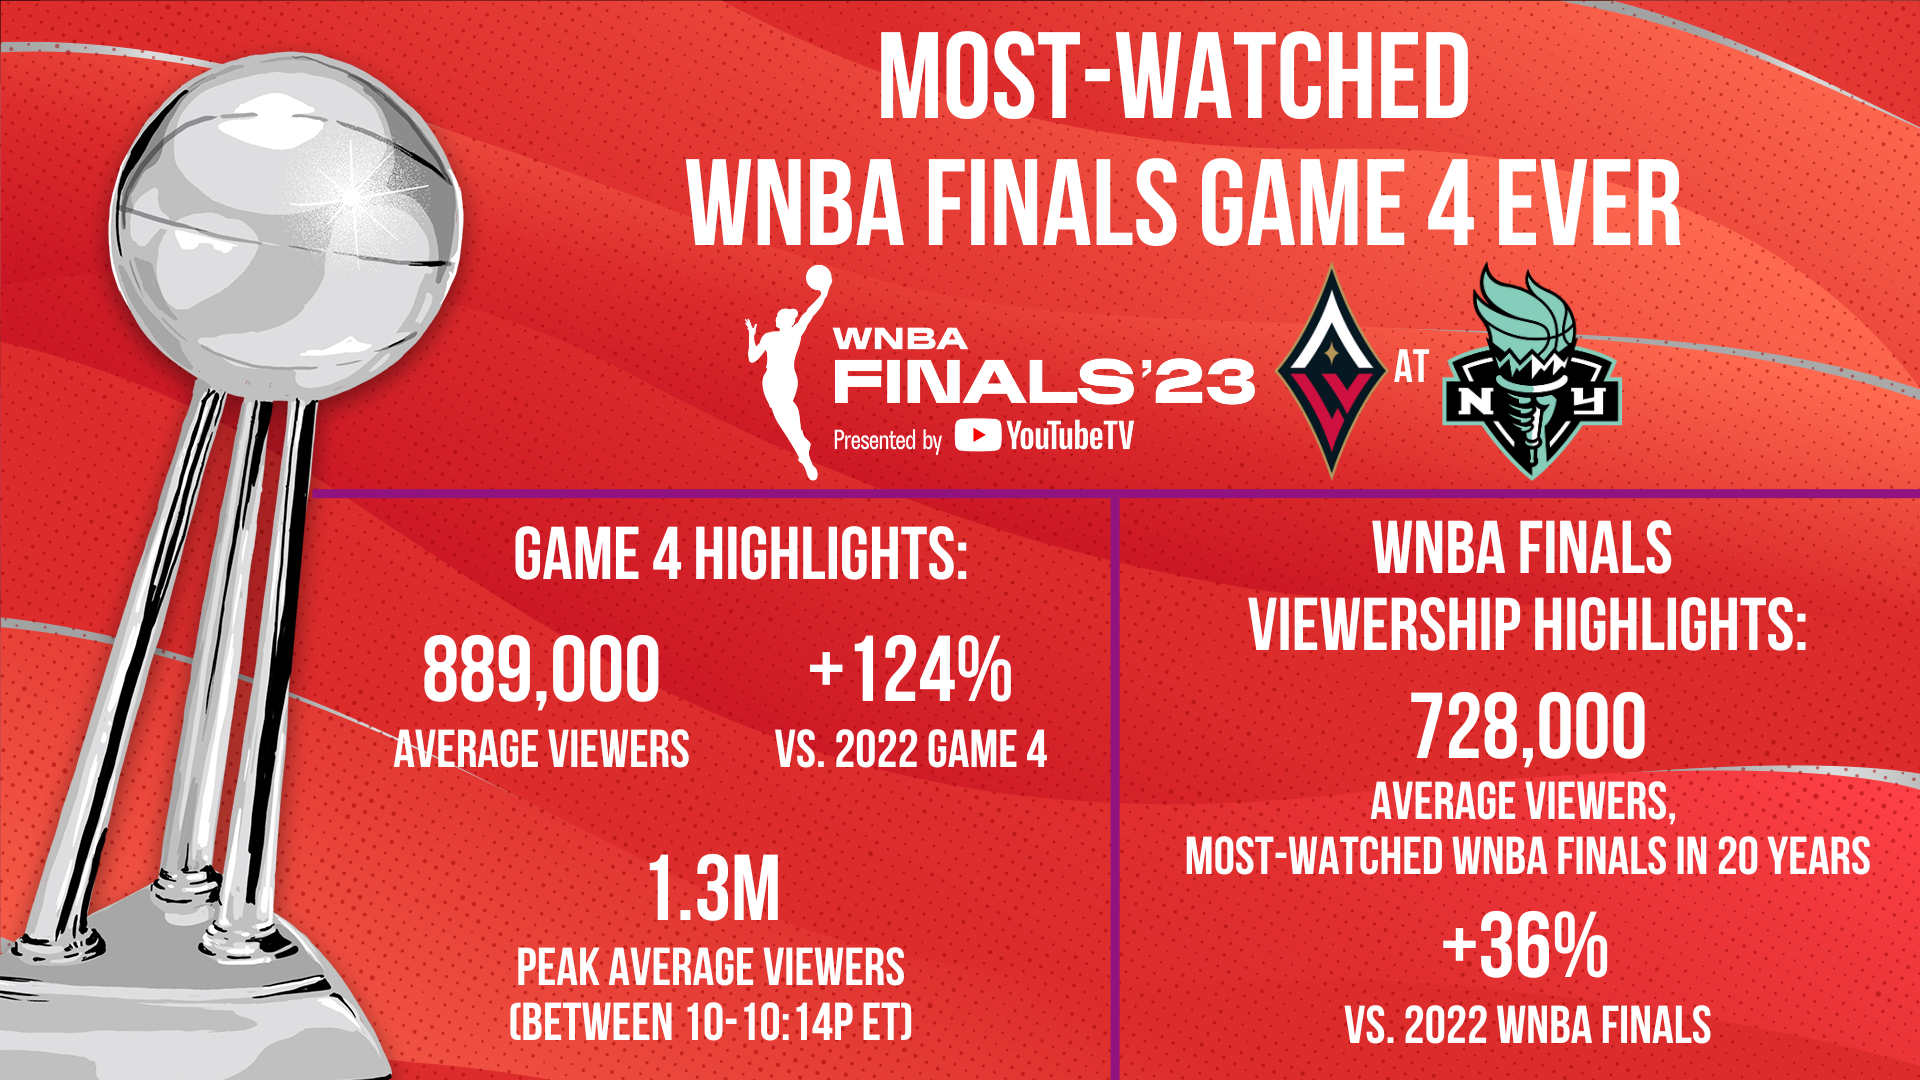 ESPN's Game 4 of the 2023 WNBA Finals Presented by YouTubeTV is Most-Watched Game 4 on Record